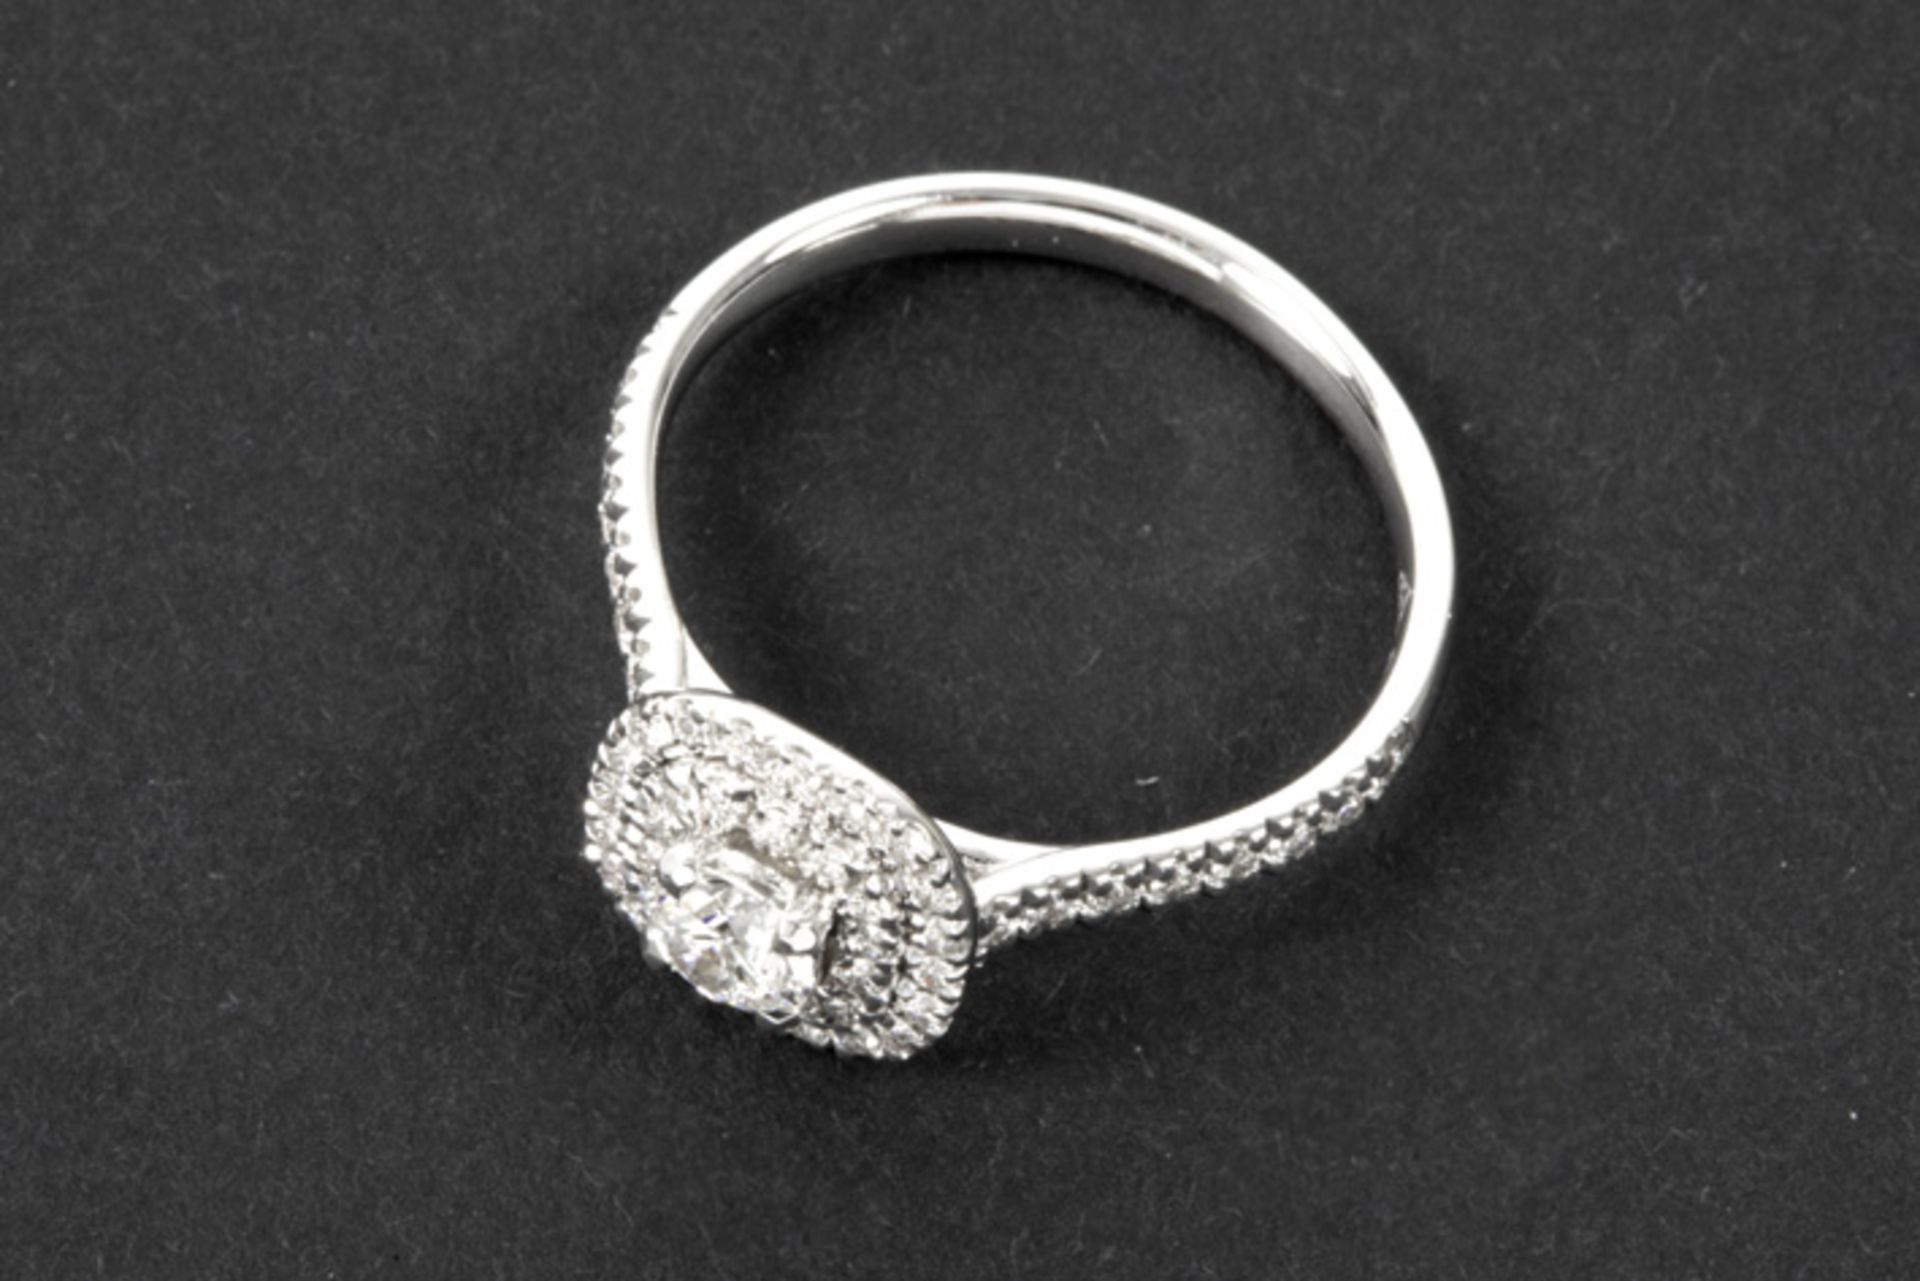 ring in white gold (18 carat) with a 0,30 carat very high quality brilliant cut diamond, - Image 3 of 3